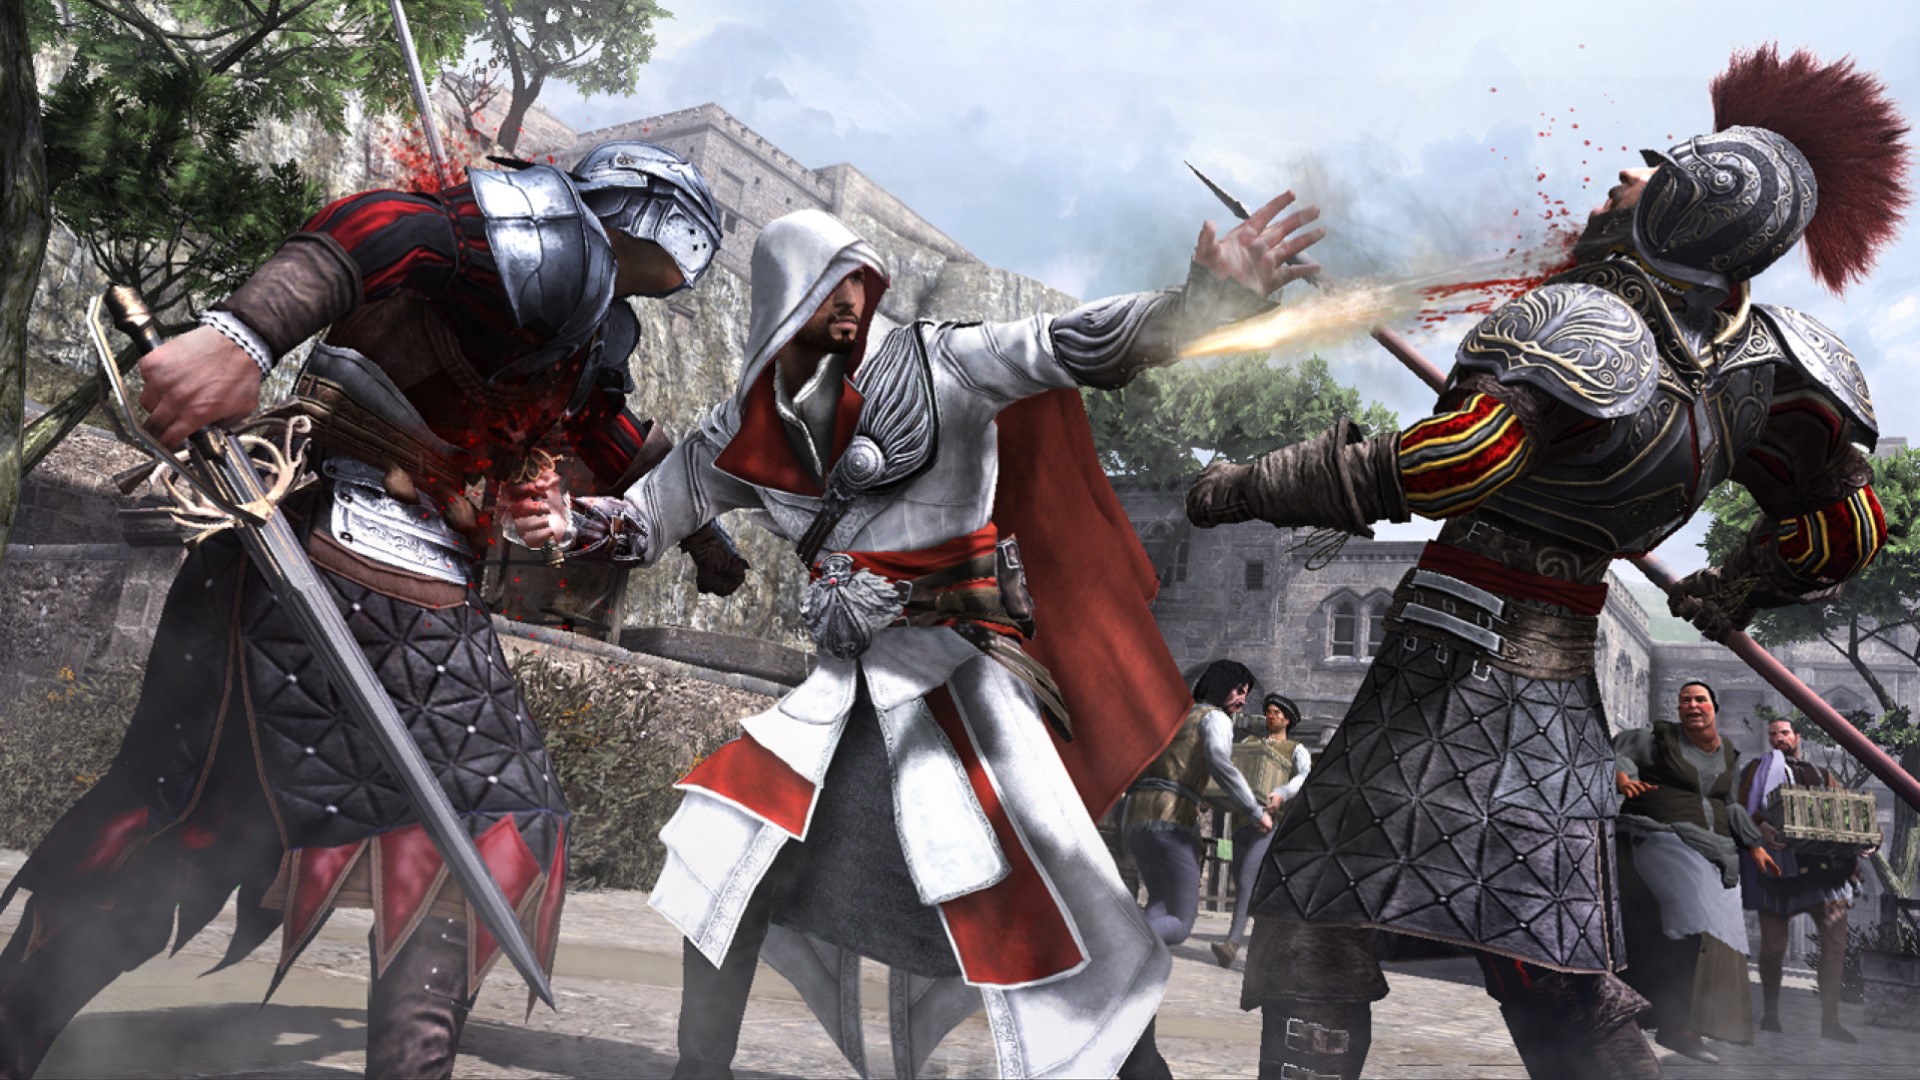 Old Assassin’s Creed games will stay available after ‘decommissioning’